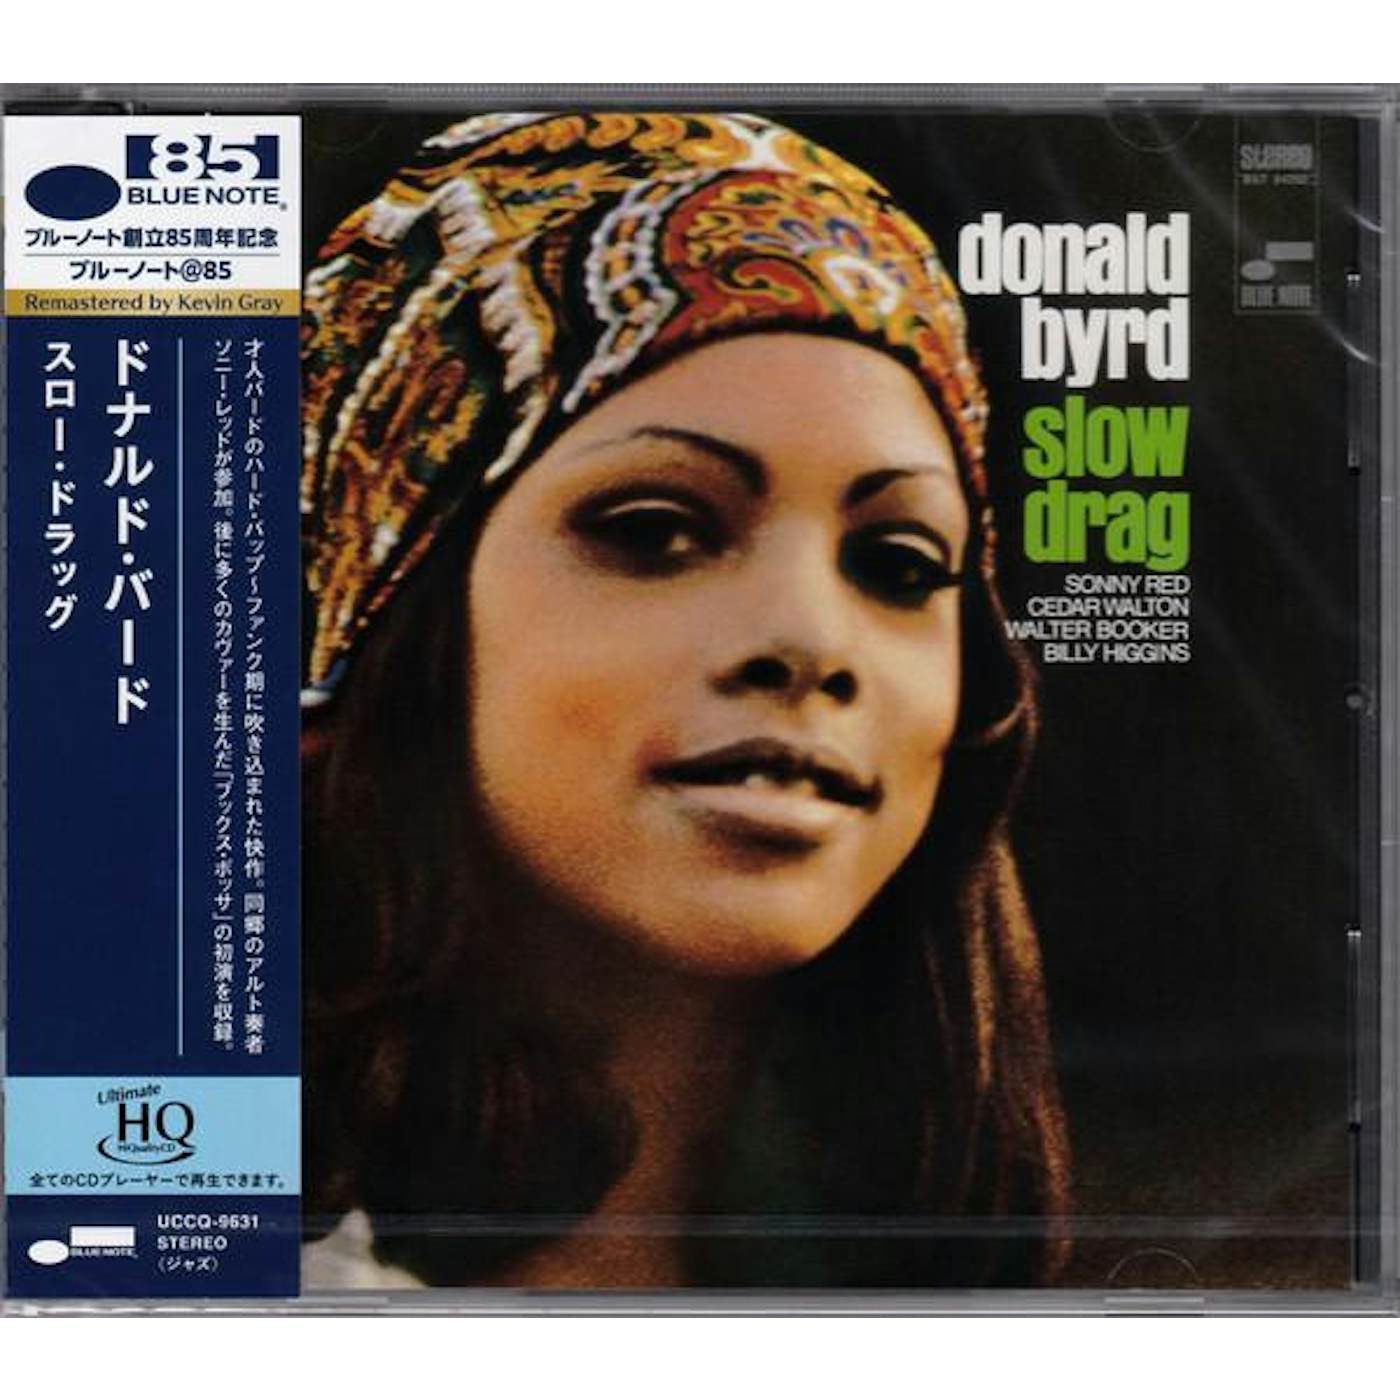 Donald Byrd SLOW DRAG (UHQCD) (BLUE NOTE 85TH ANNIVERSARY EDITION/REMASTERED BY KEVIN GRAY) CD